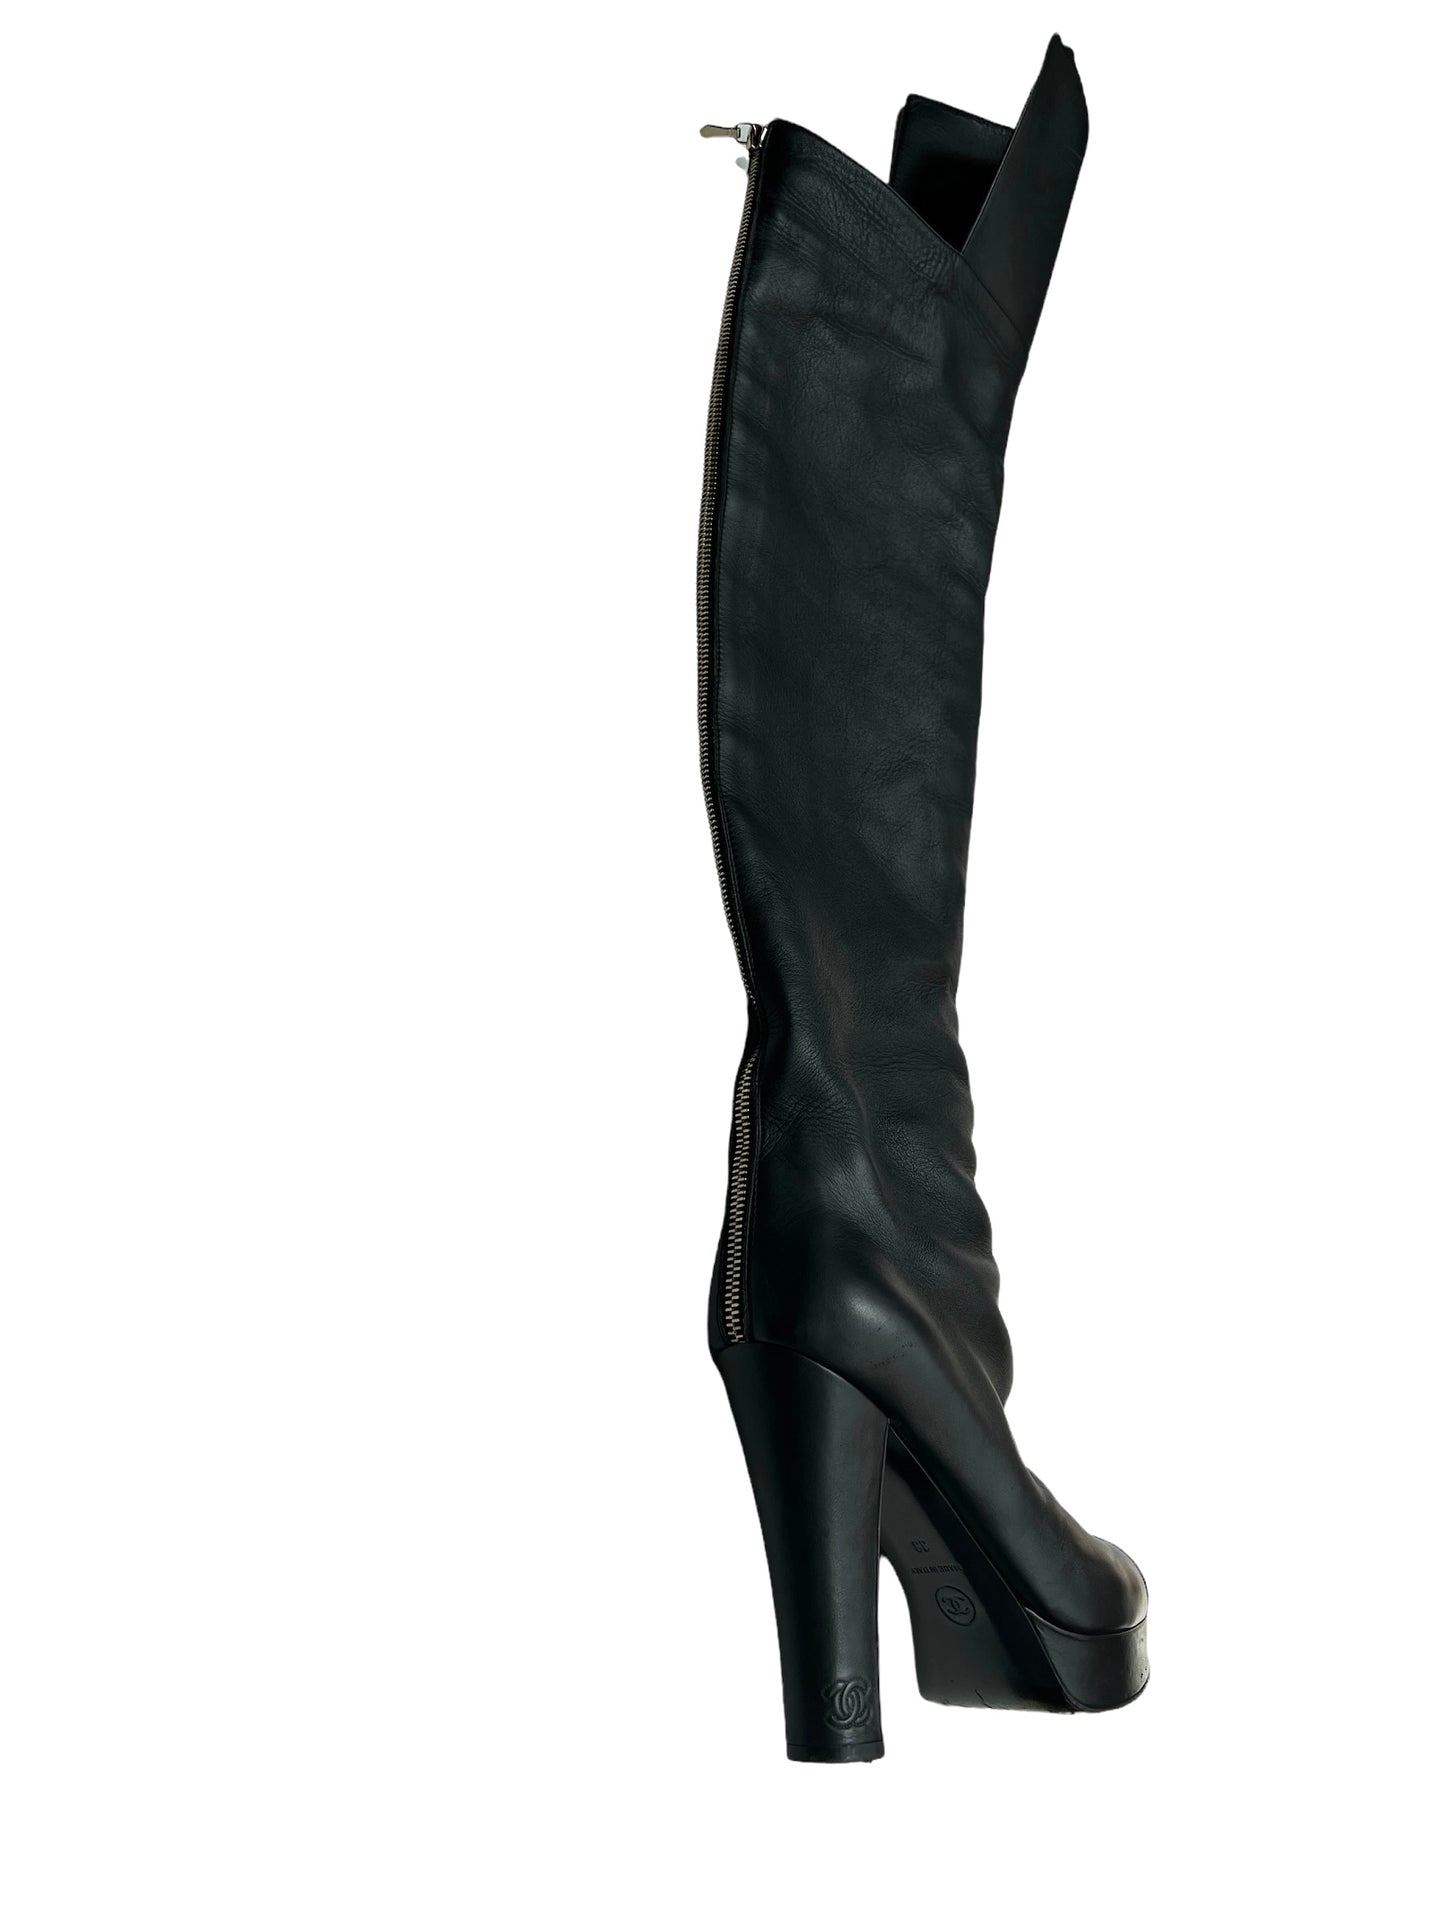 Black Over-The-Knee Boots - 7.5